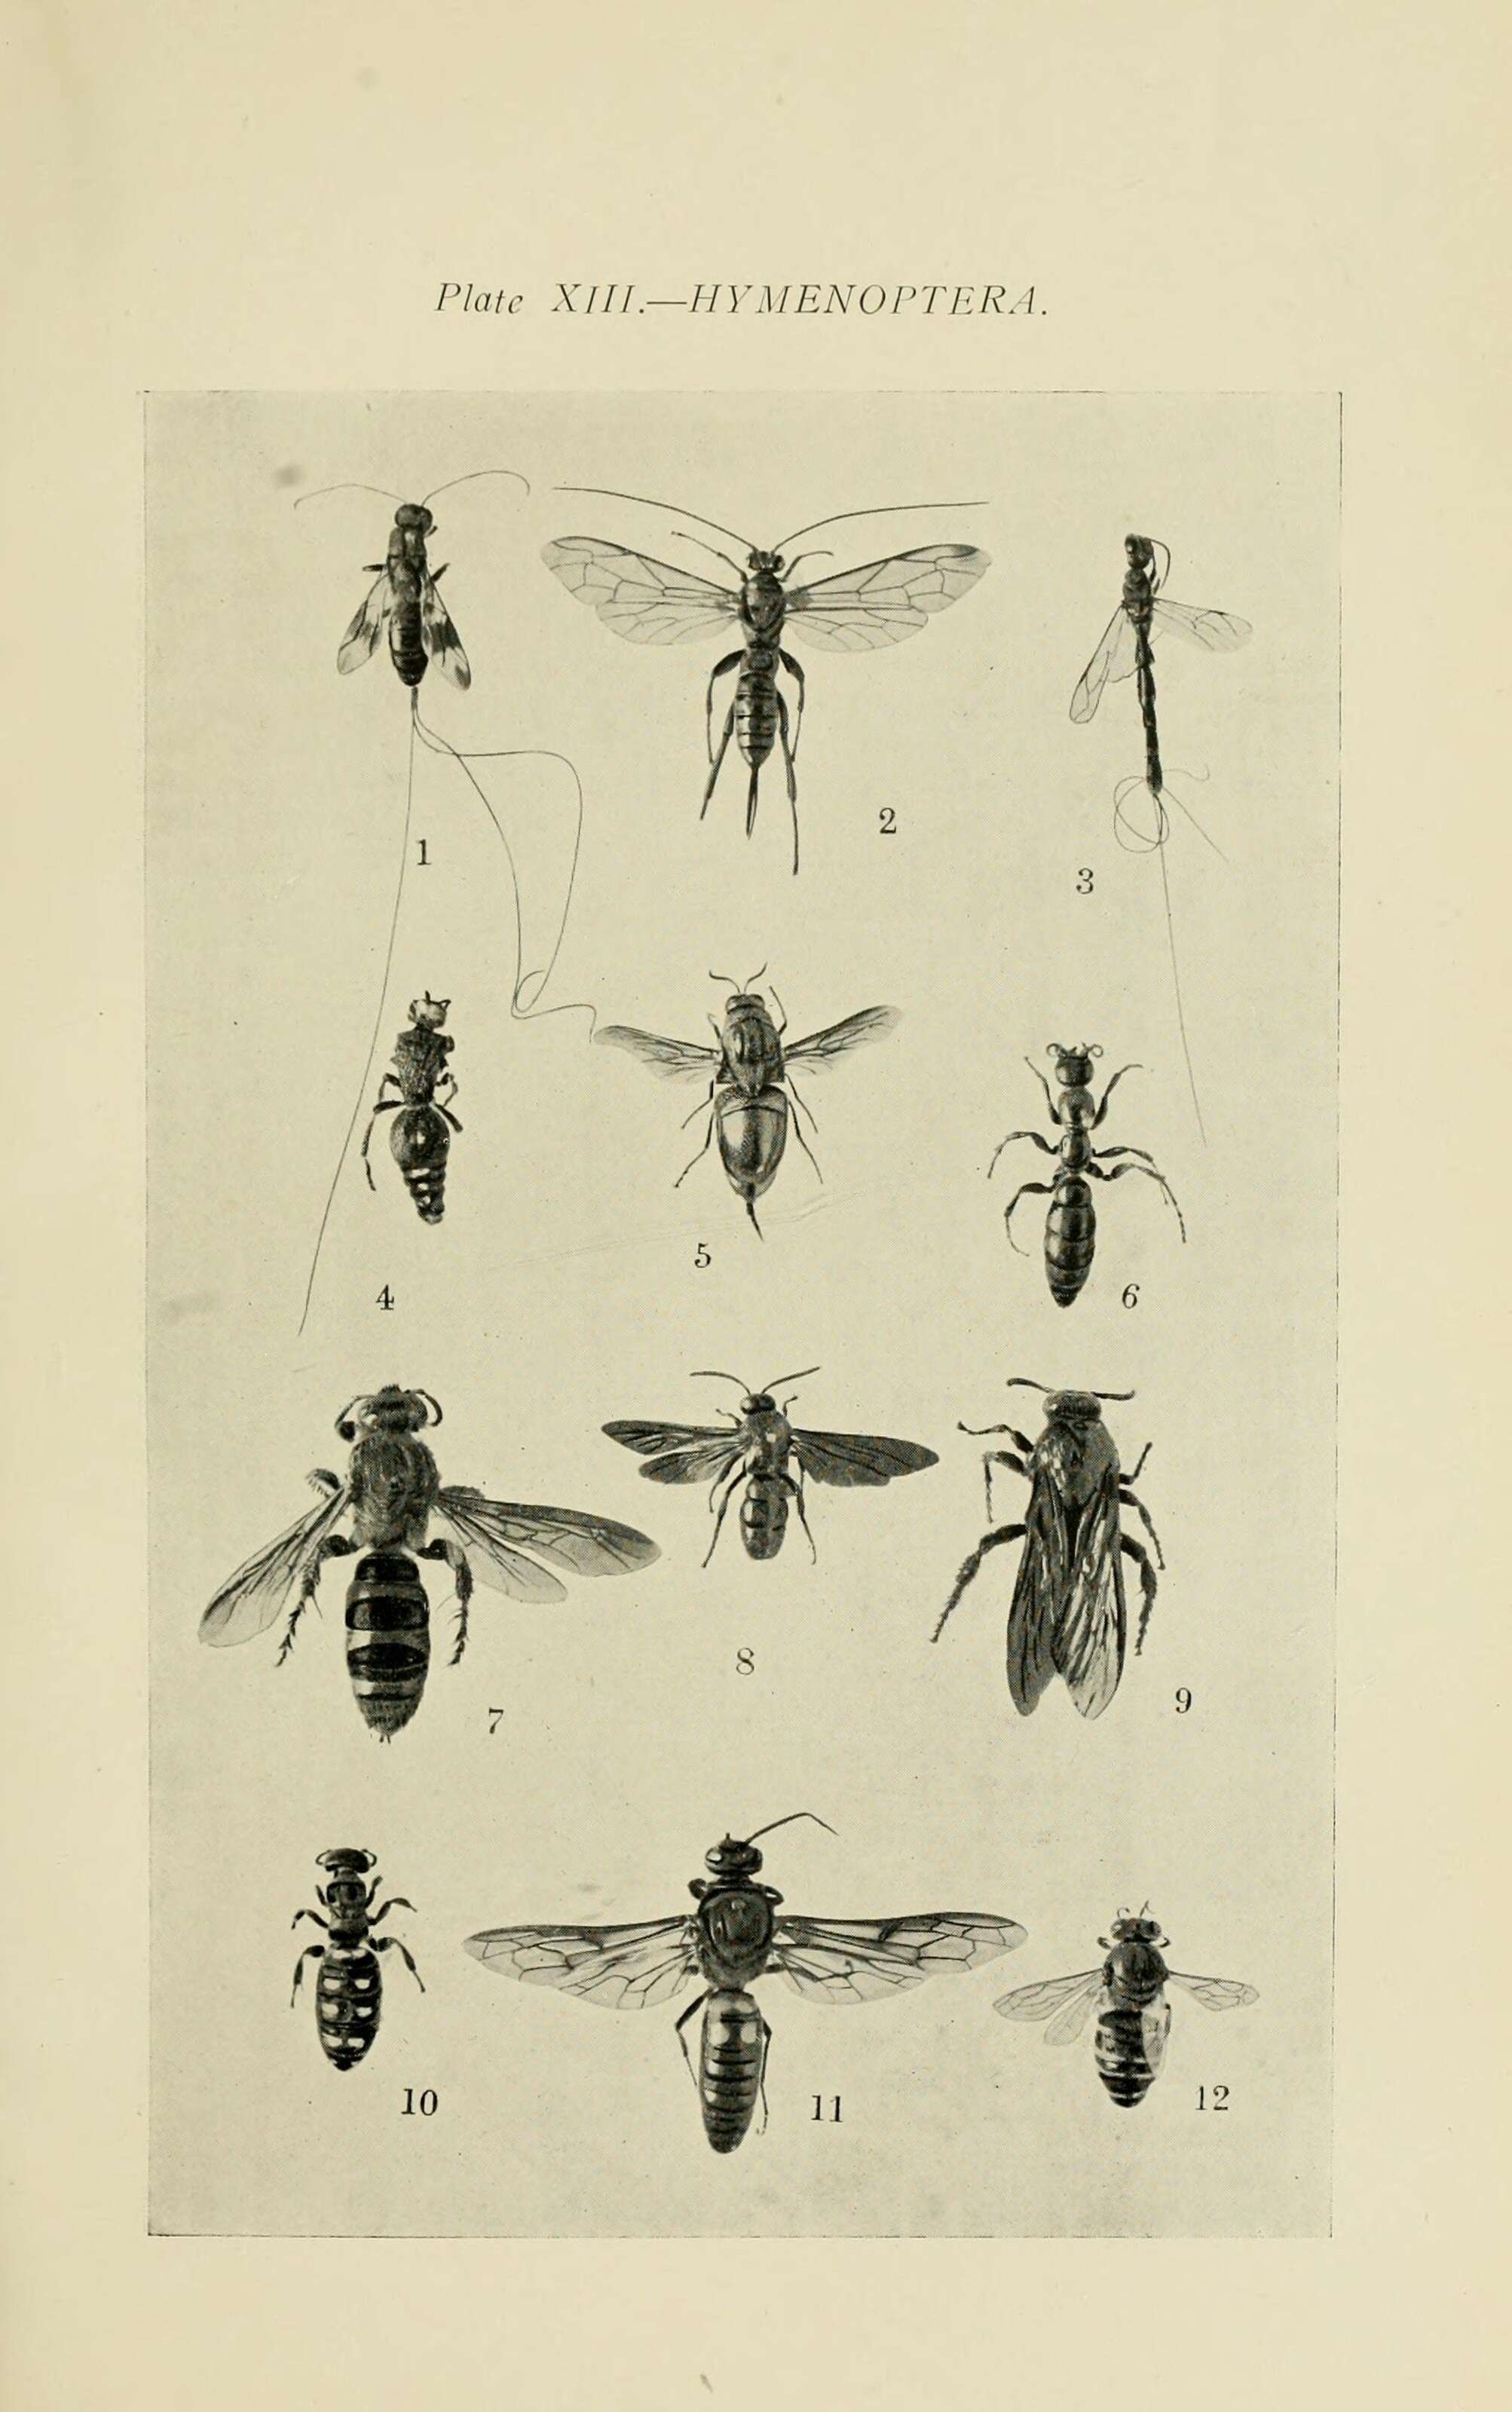 Image of long-tailed wasps